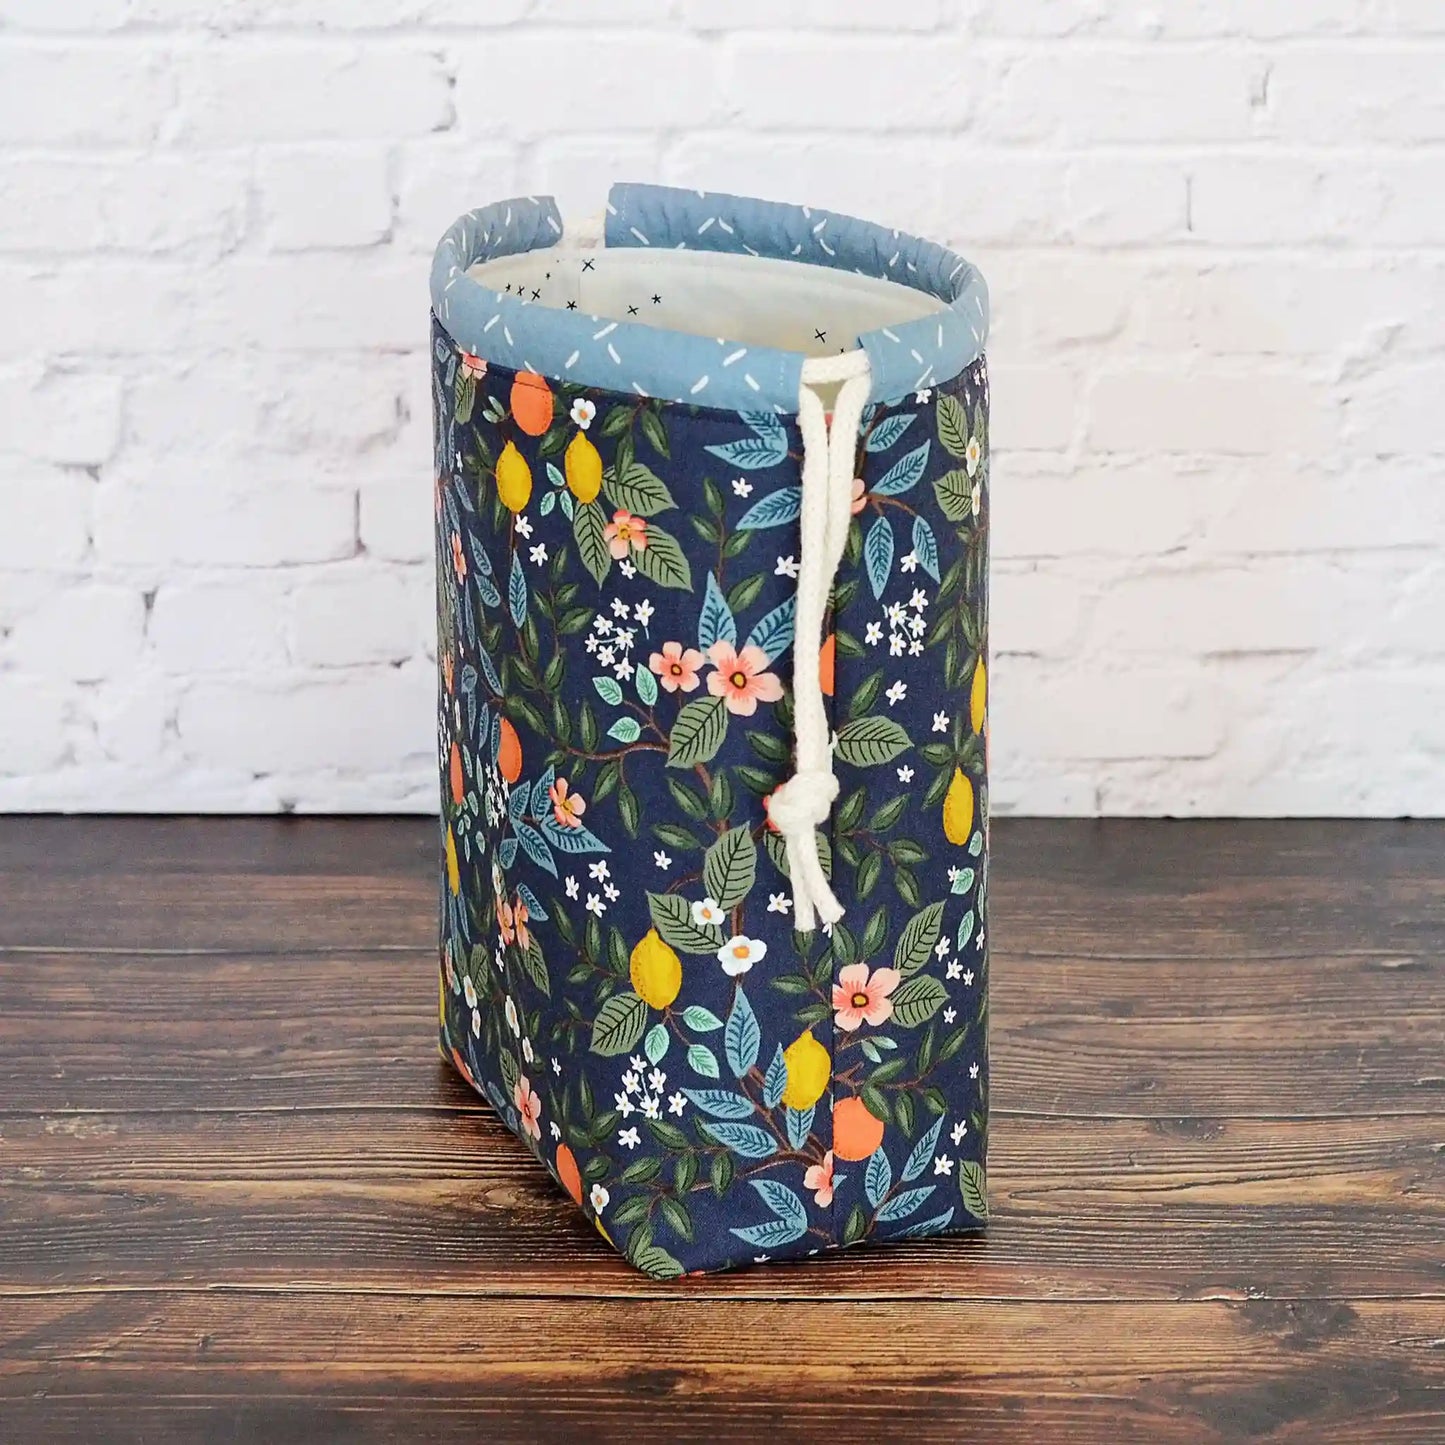 Navy floral bag made from Rifle Paper Co's Bramble collection.  Made in Nova Scotia, Canada by Yellow Petal Handmade.